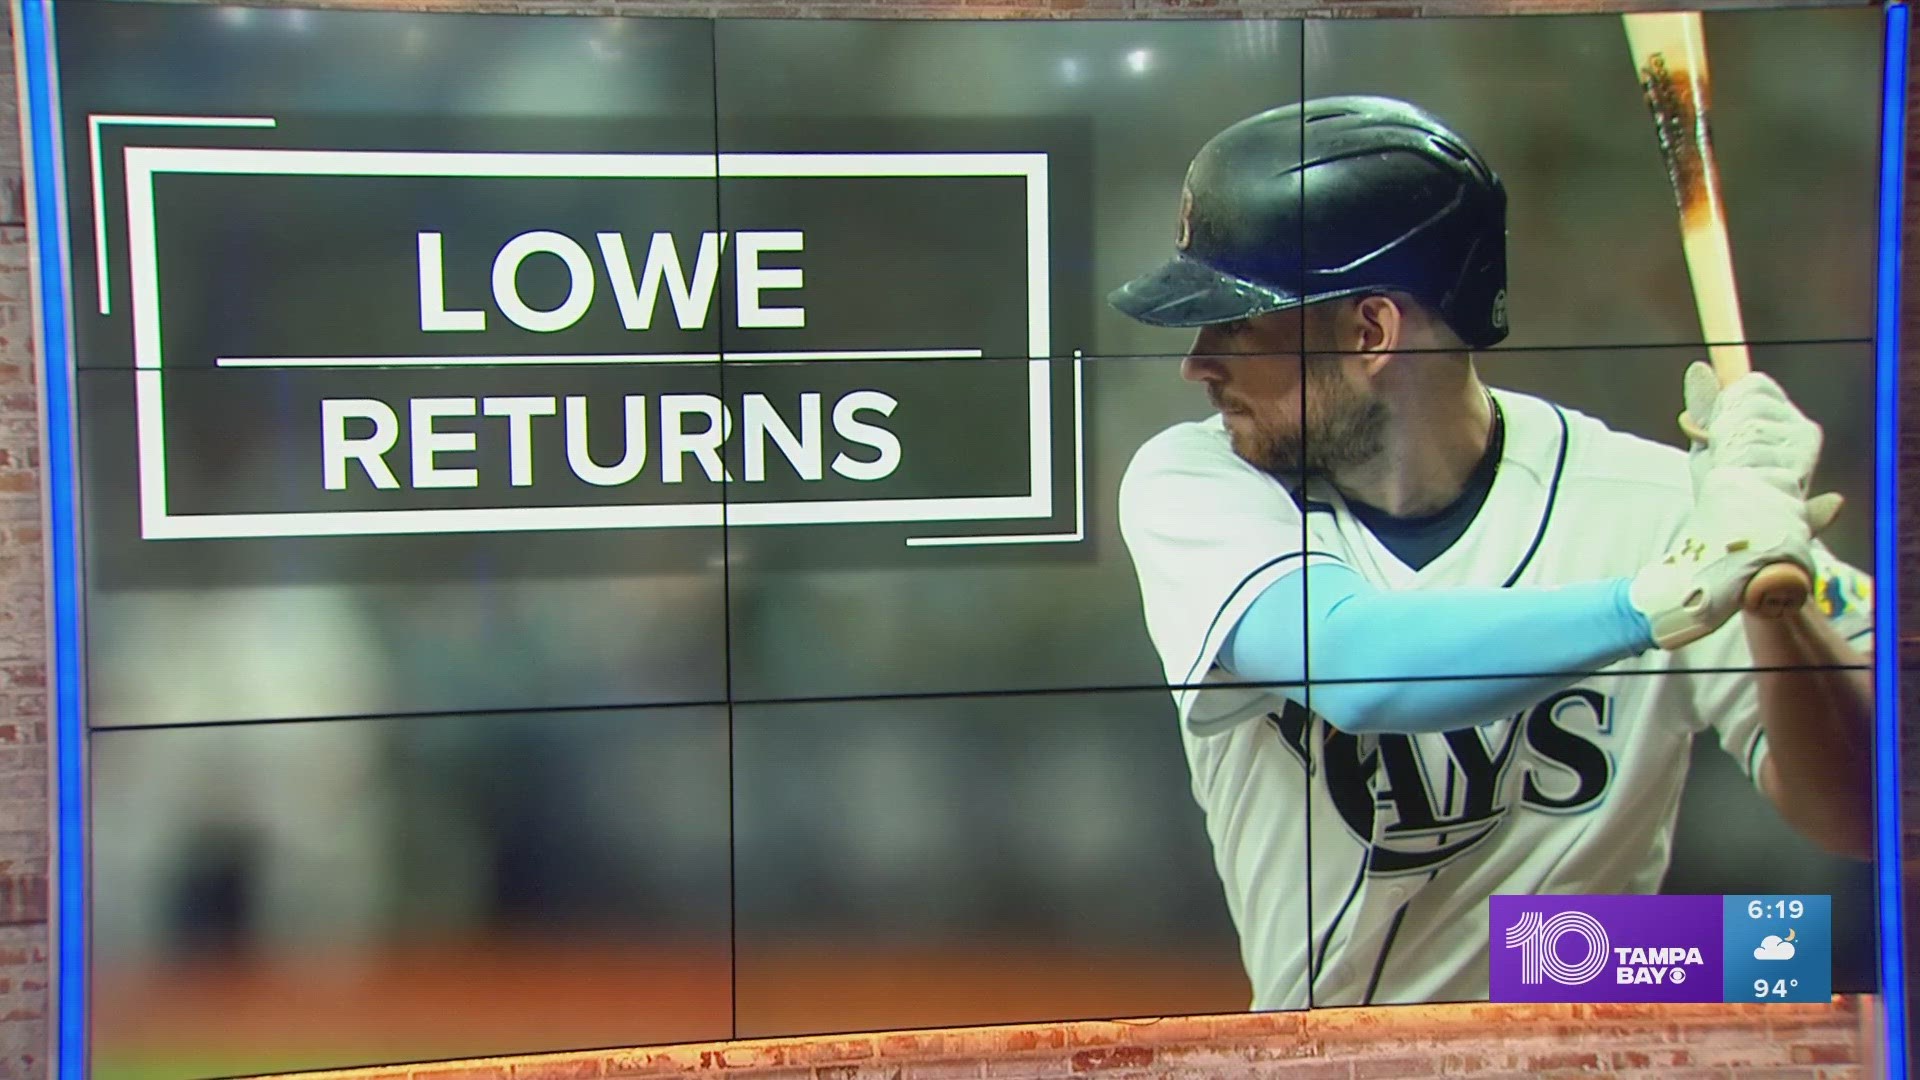 Lowe was hitting .205 with nine homers and 29 RBIs in 50 games before being sidelined by his latest back injury.